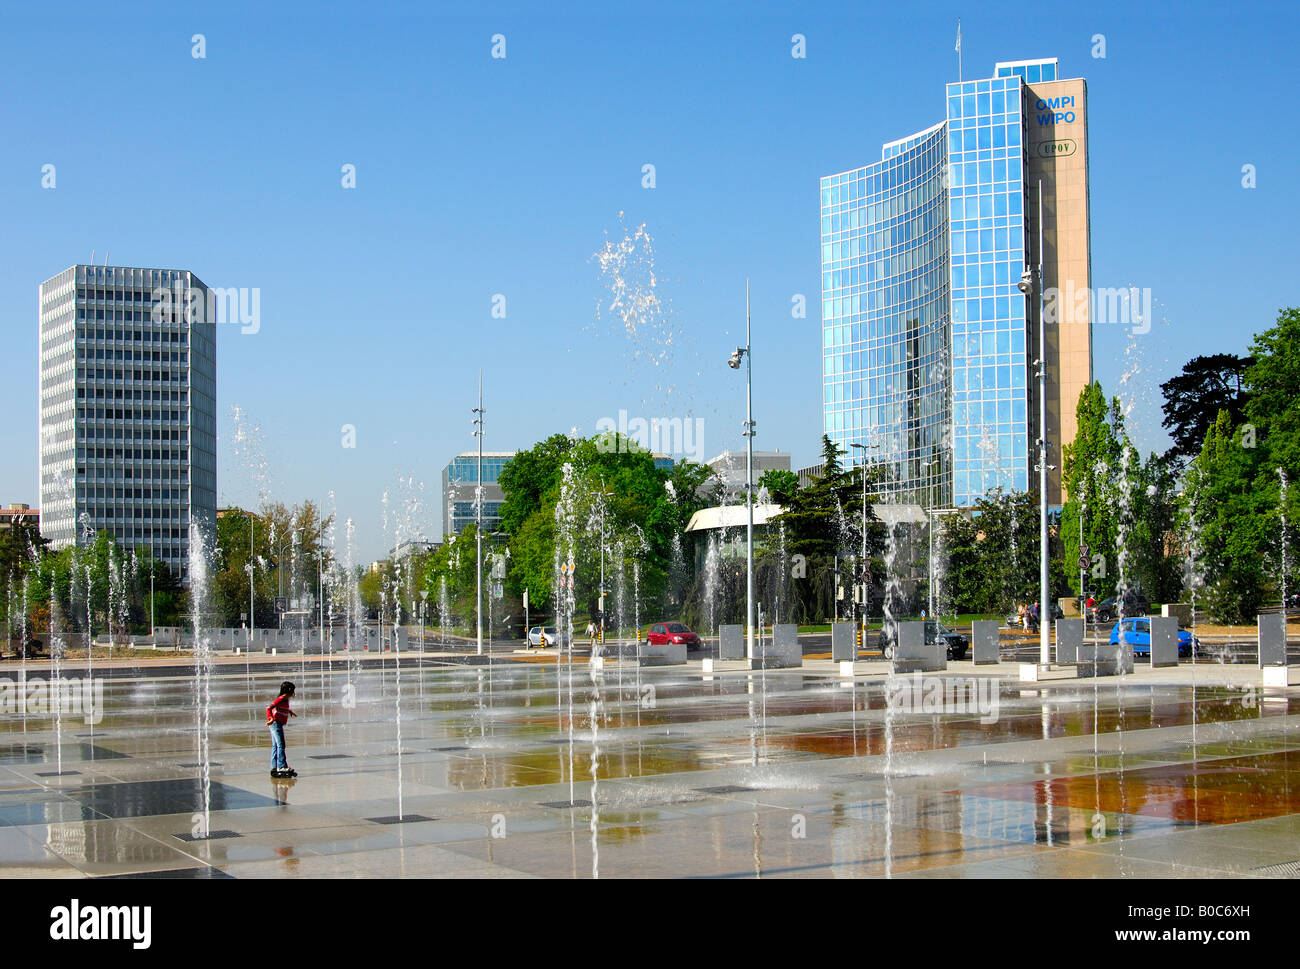 Trick fountains on Place des Nations in Geneva, ITU Headquarters left, WIPO UPOV buildings on the right, Geneva Switzerland Stock Photo